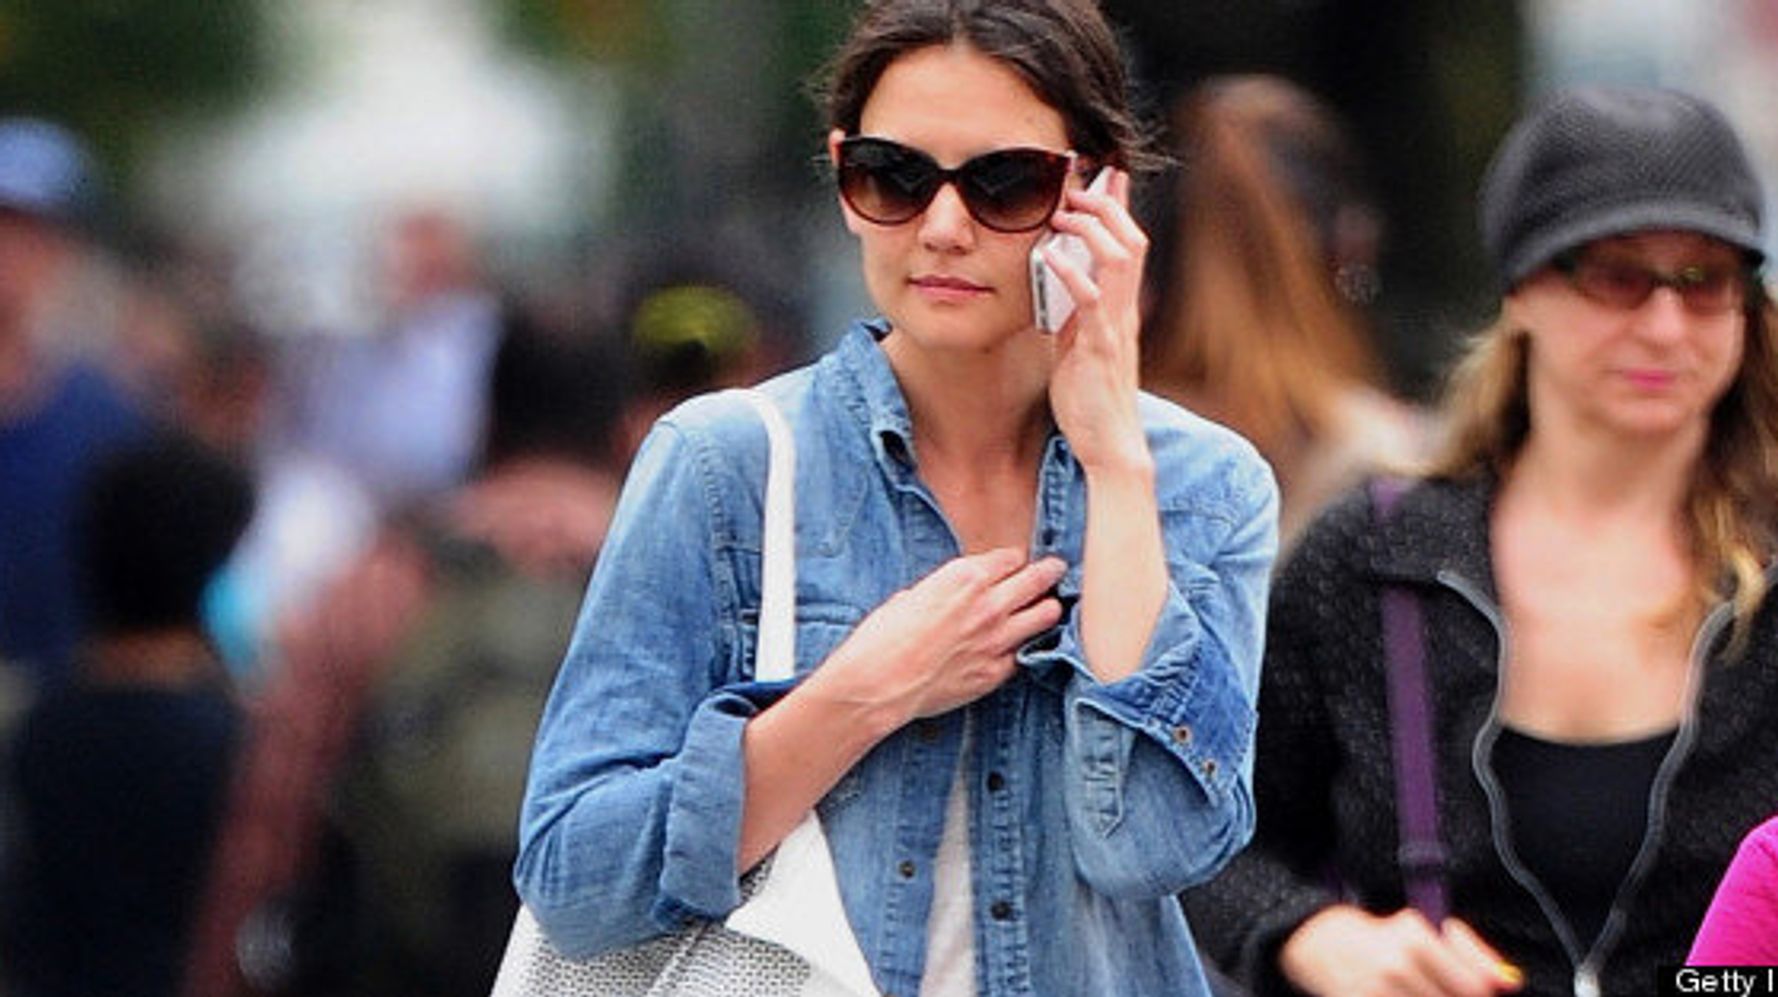 Spotted: Katie Holmes in another Canadian Tuxedo!